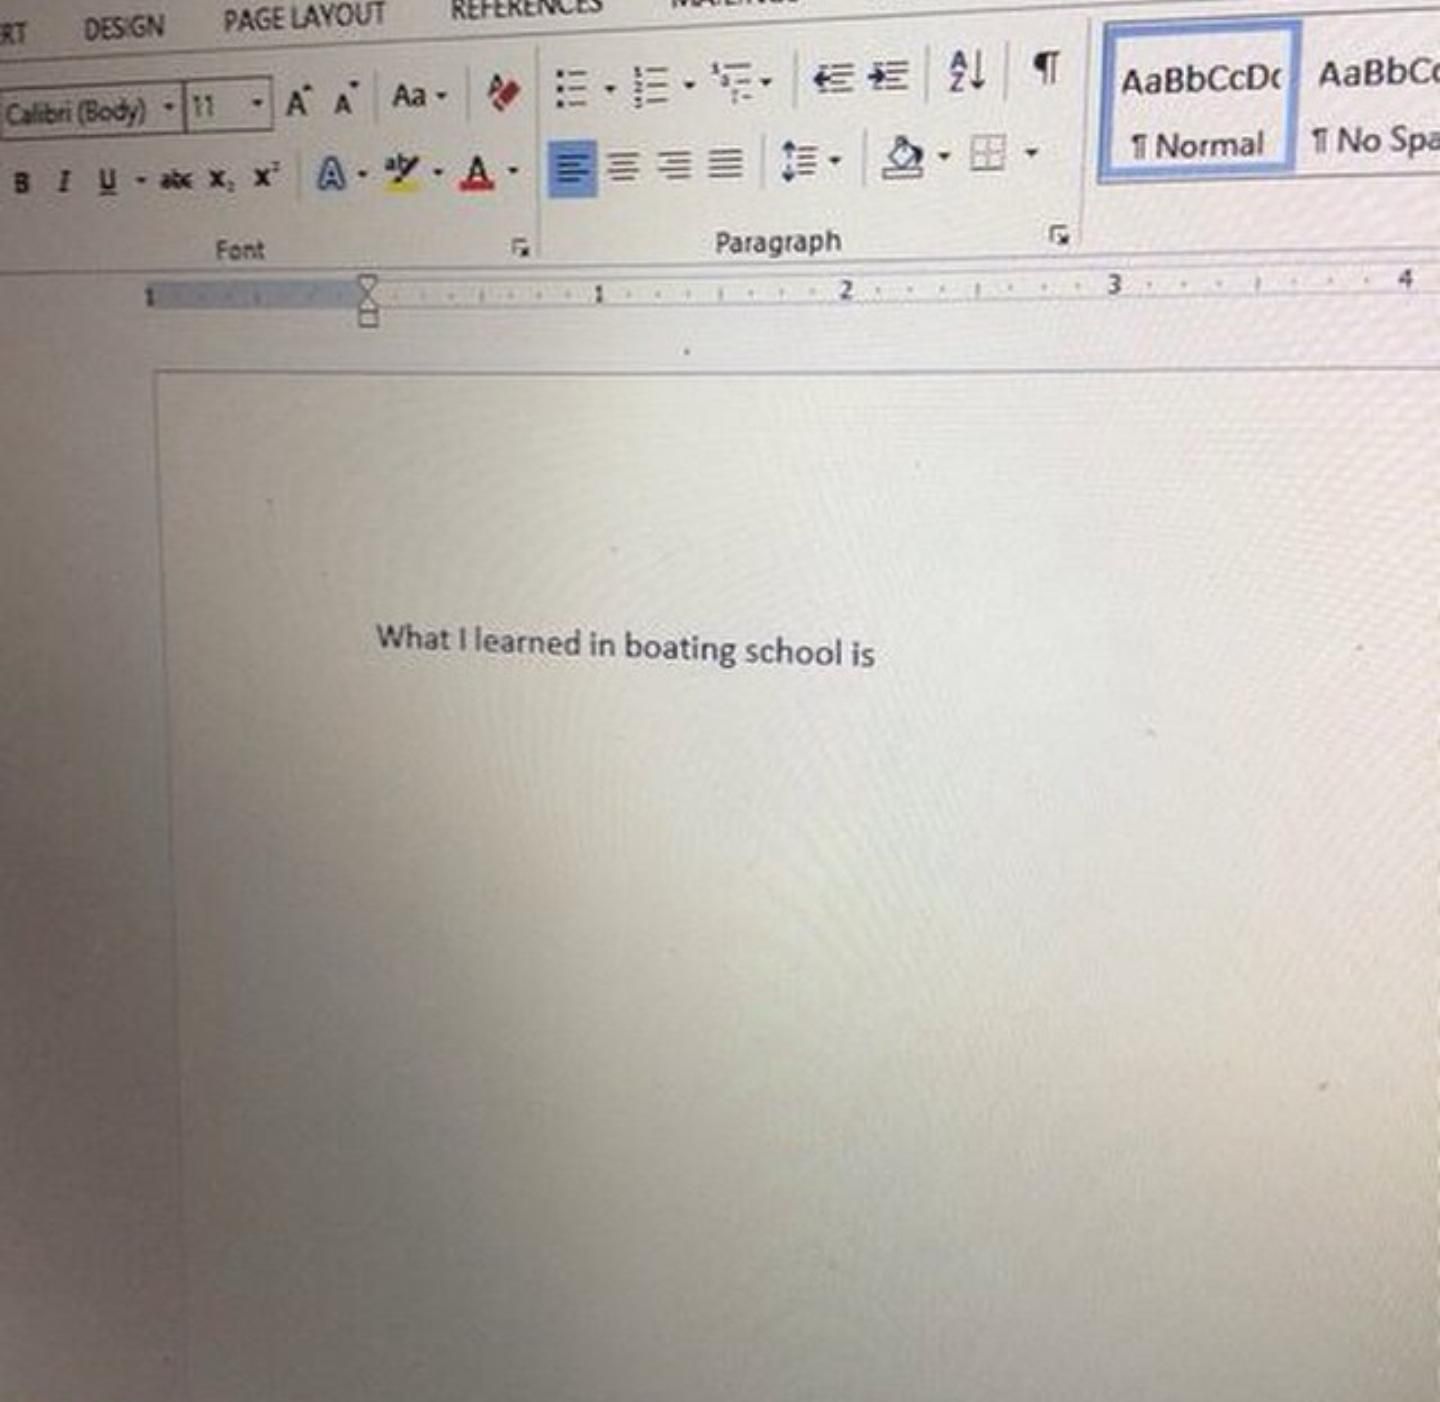 Couple hours into my college essay here